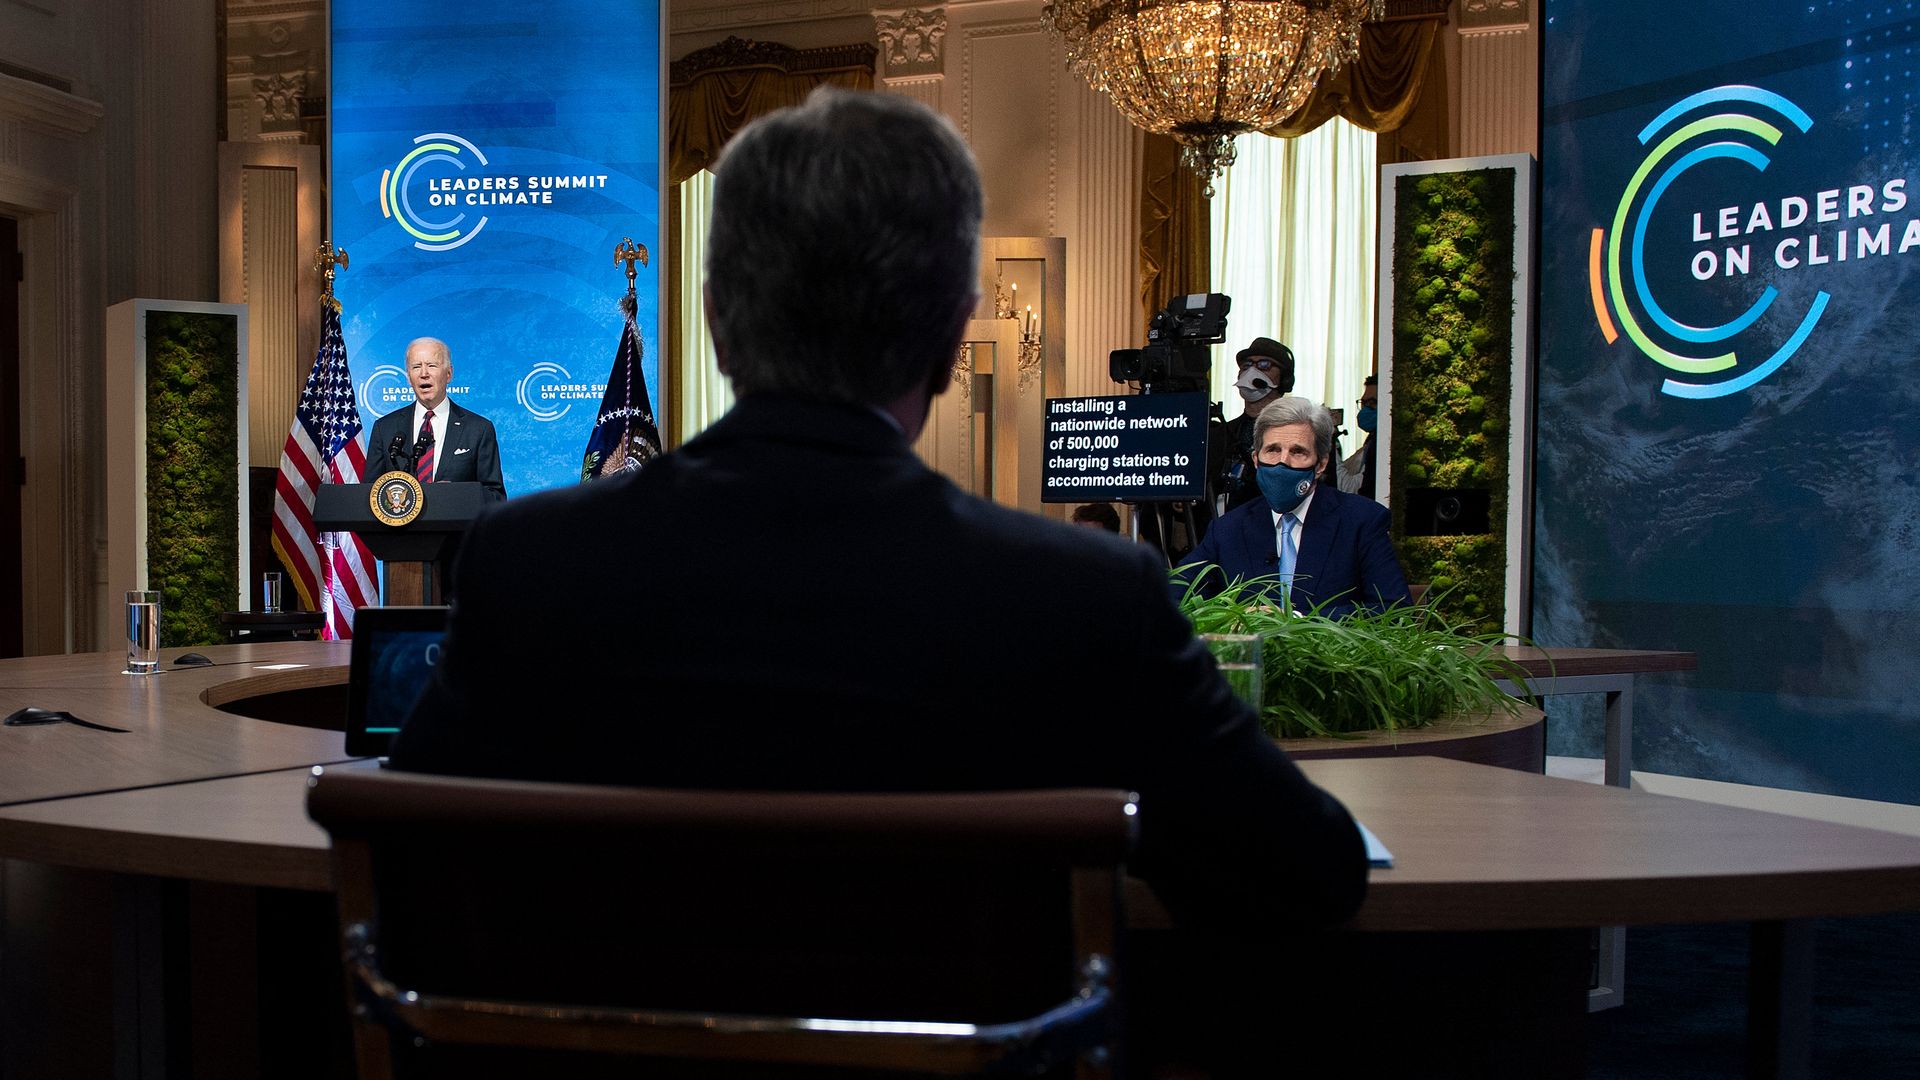 Secretary of State Antony Blinken is seen looking on as President Biden and Special Envoy John Kerry kick off a two-day climate summit.